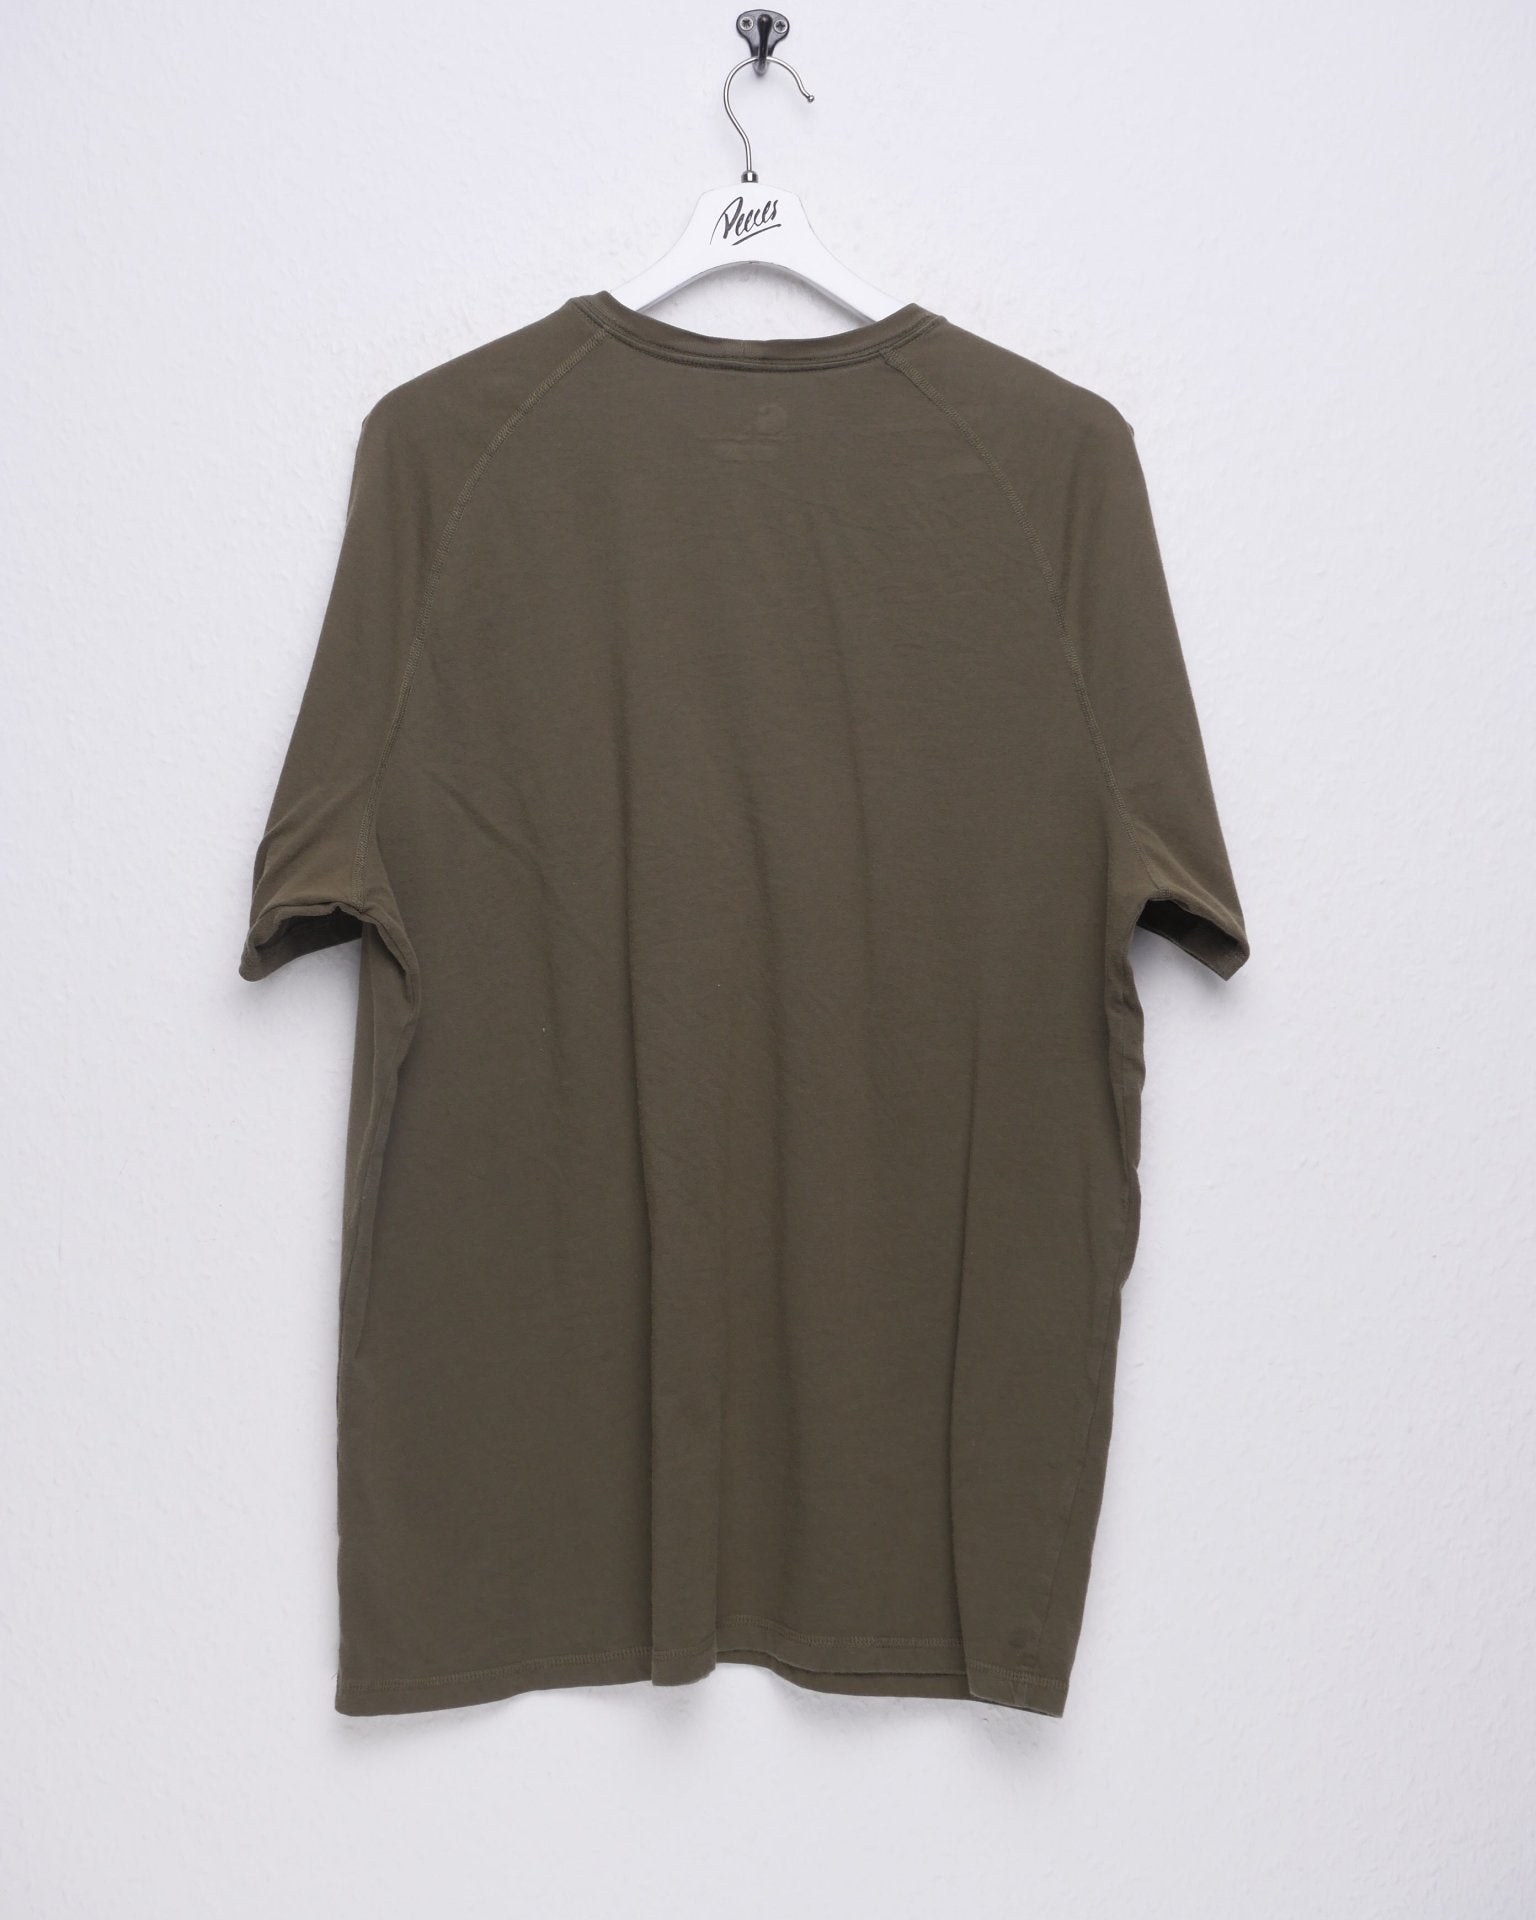 Champion embroidered Logo olive green Shirt - Peeces